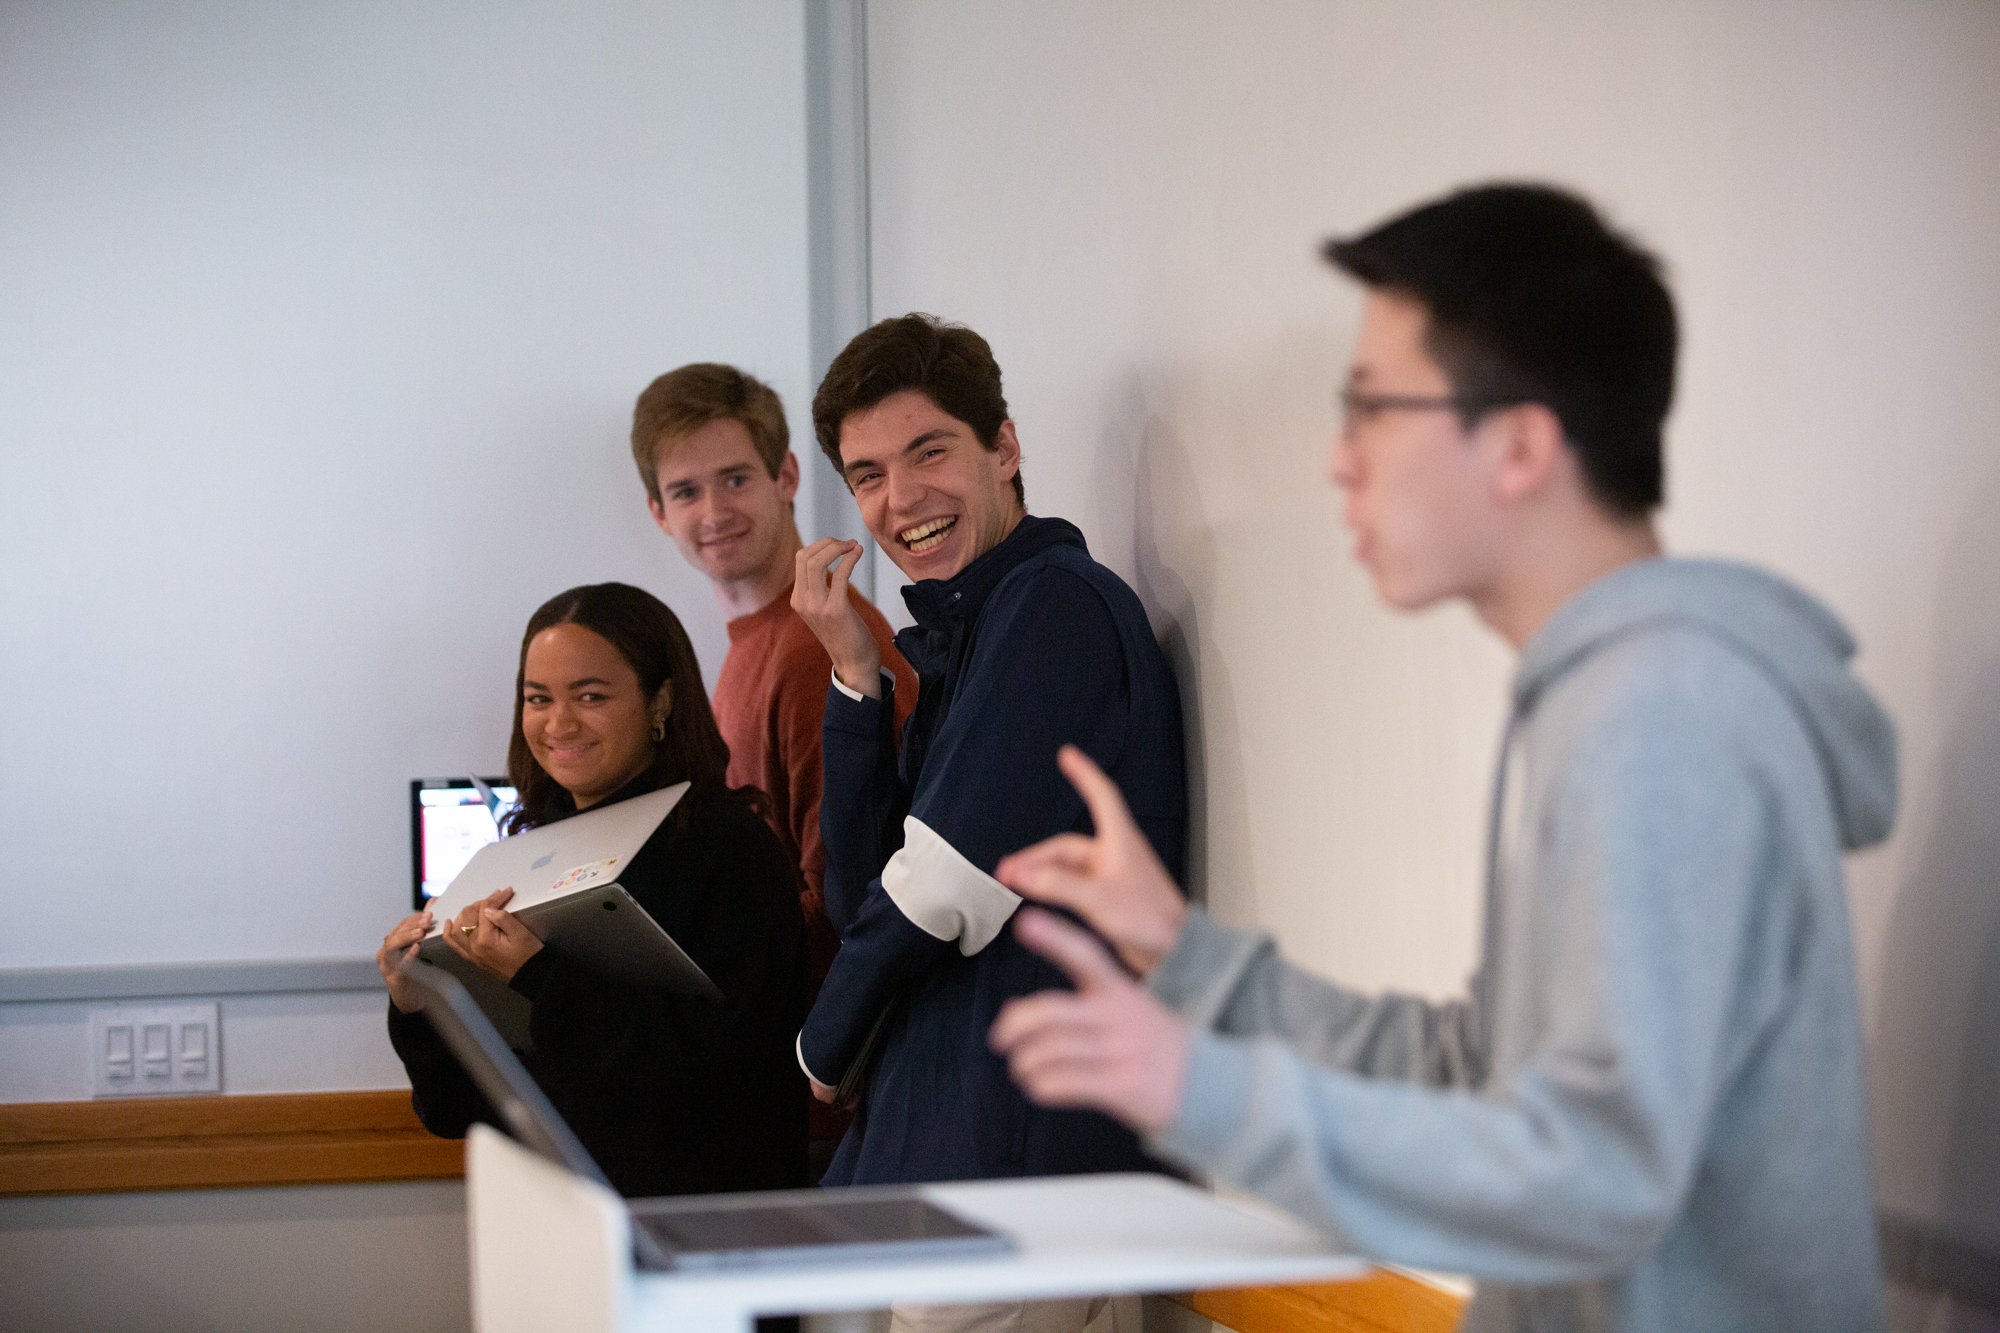 Debaters chuckle at a participant's comments at the podium during debates in the Future of Conservatism class.